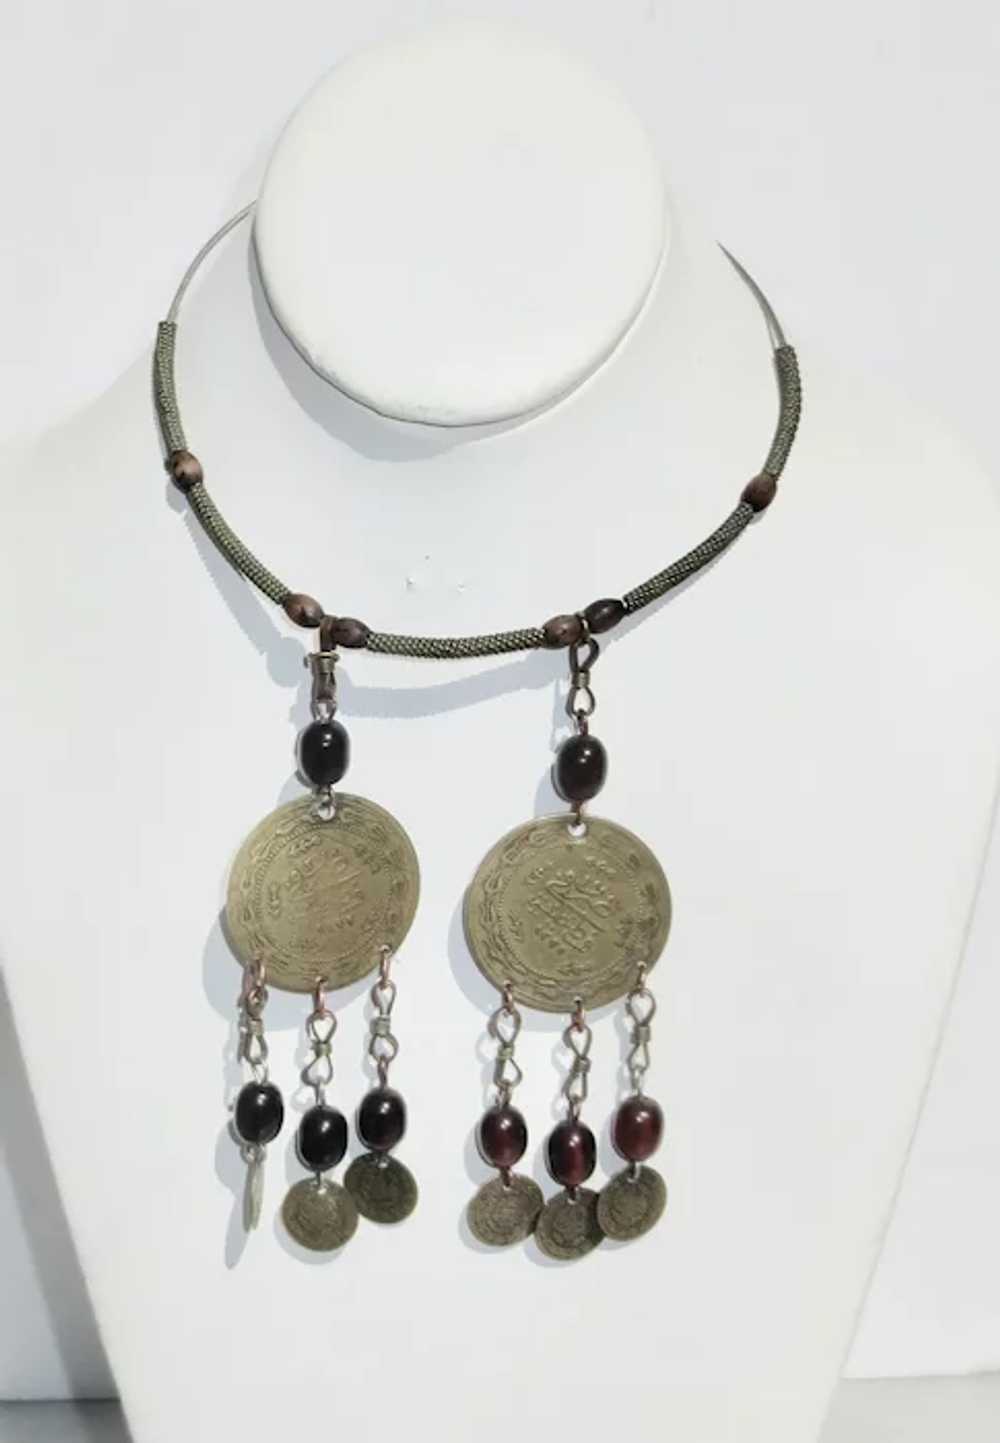 Yemenite Tribal Necklace with Coins - image 5